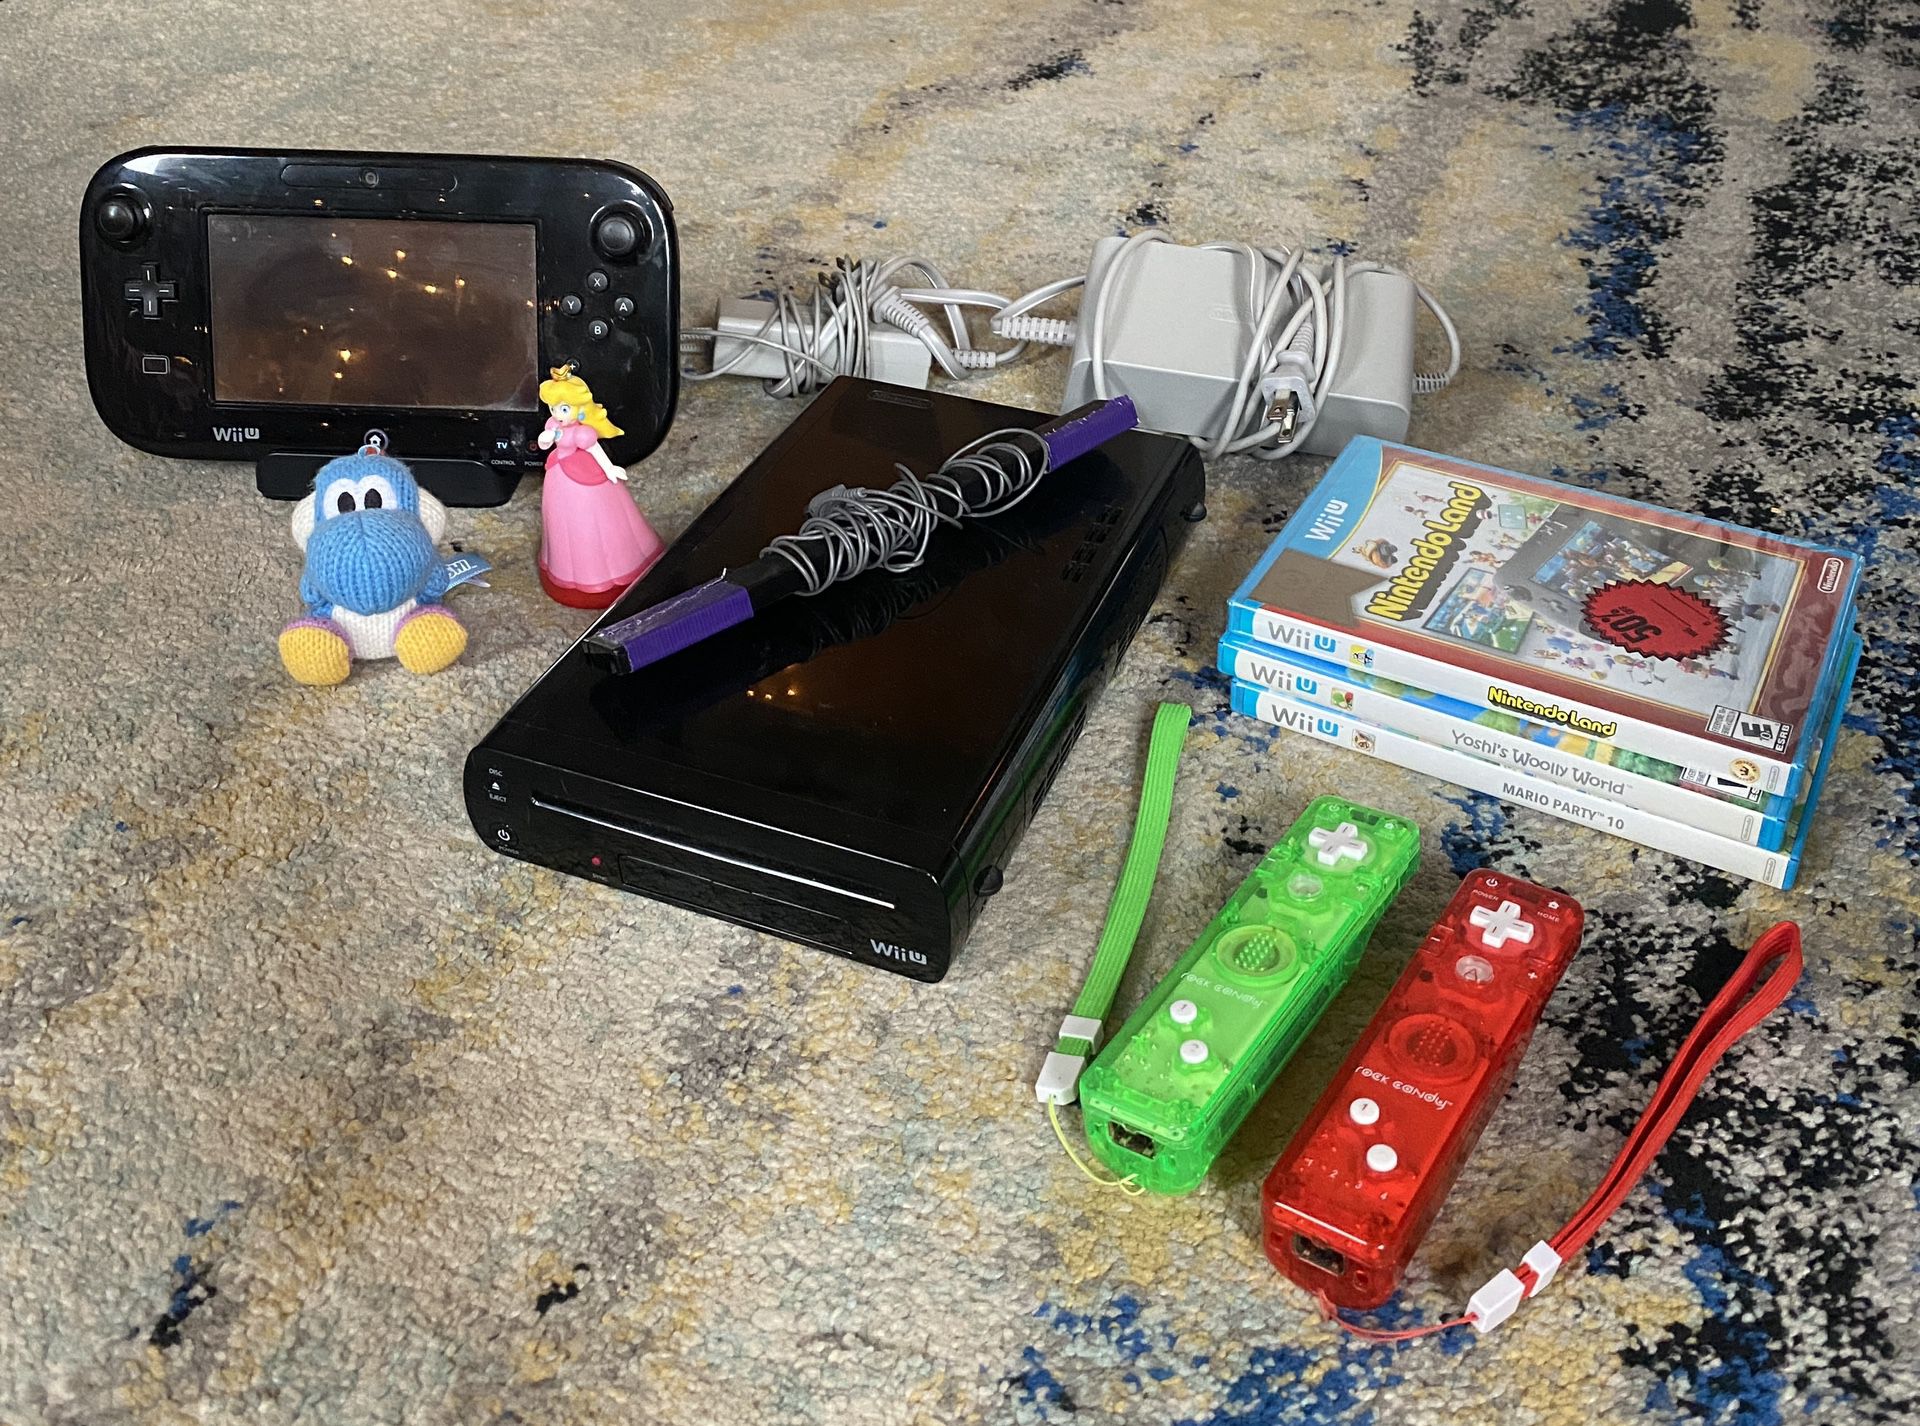 Wii U + 3 games, 2 controllers and 2 amiibos